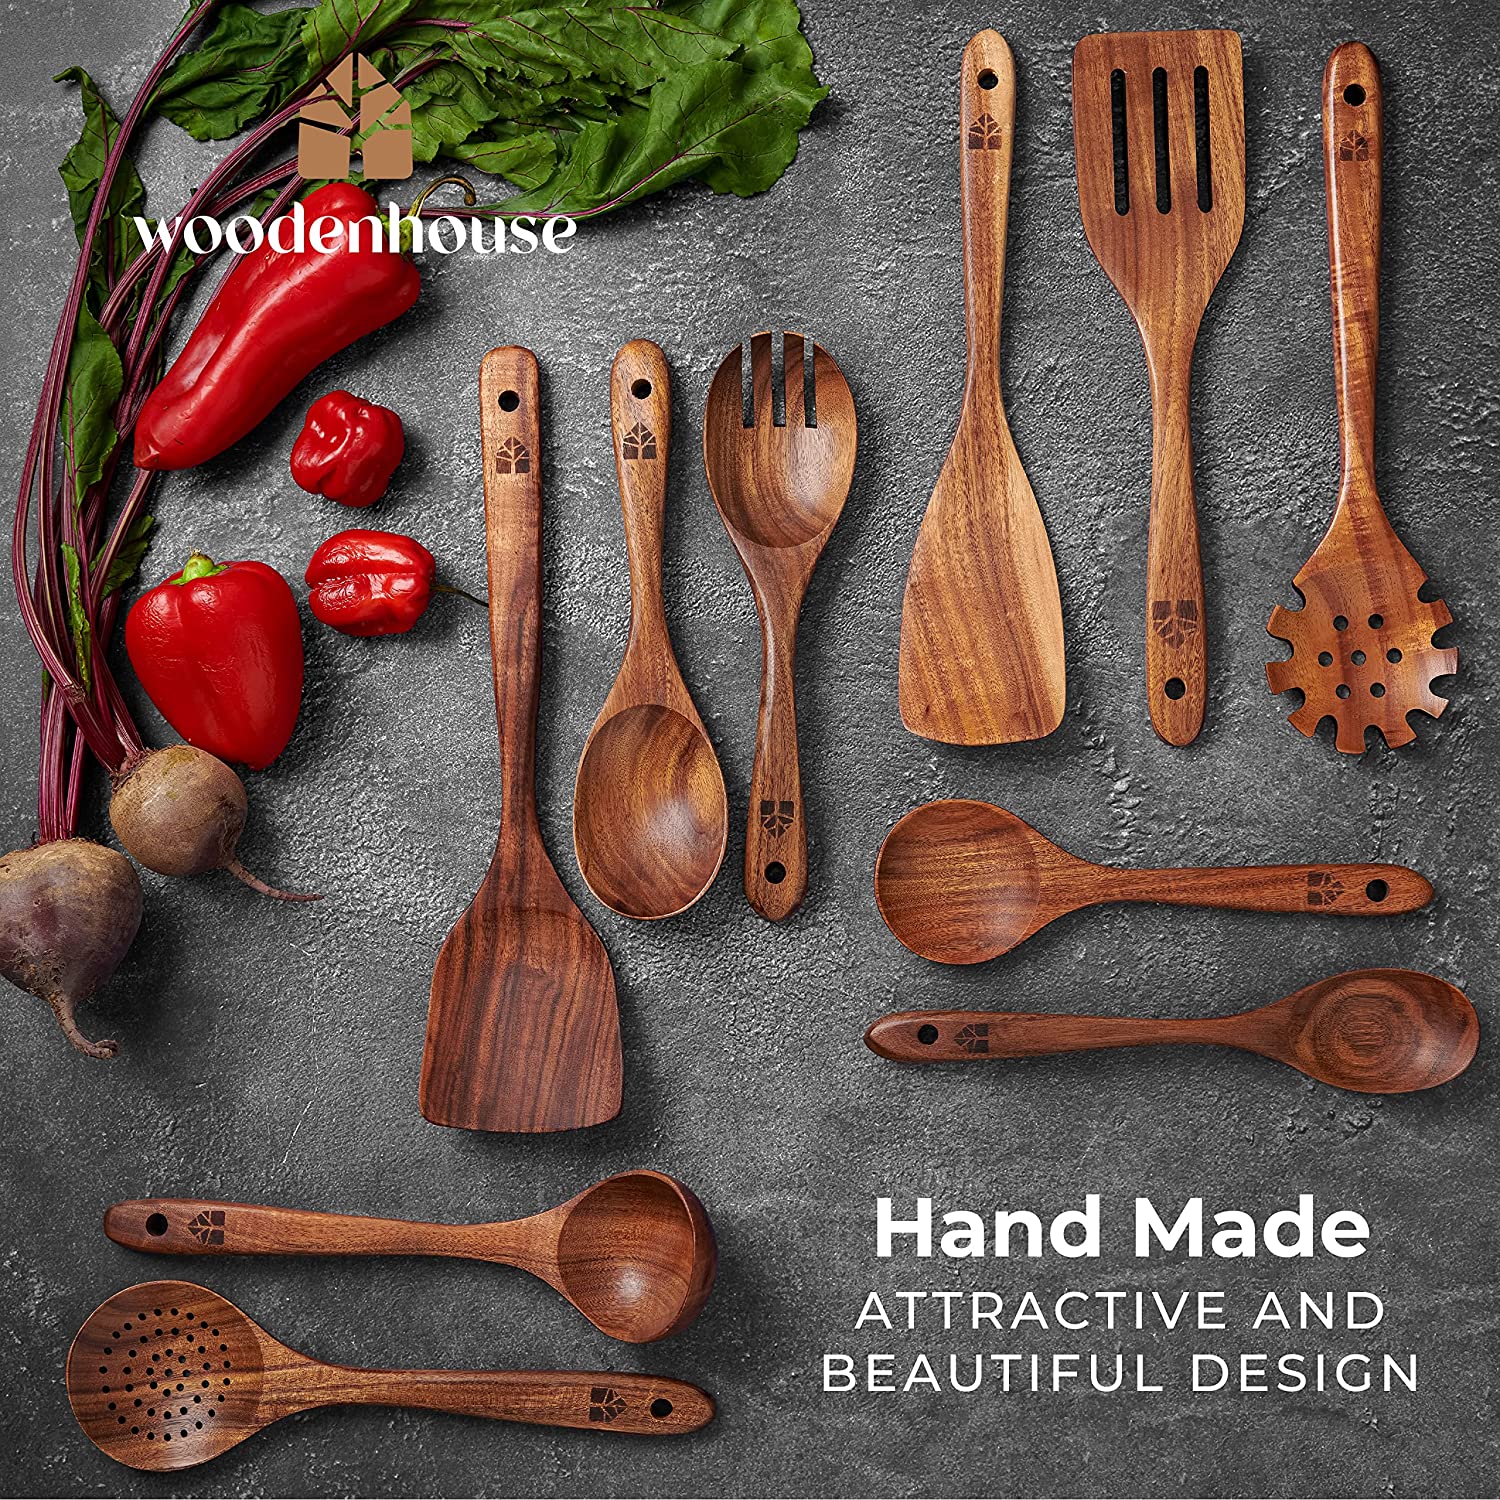 About Wooden Utensils - By Teak Wood